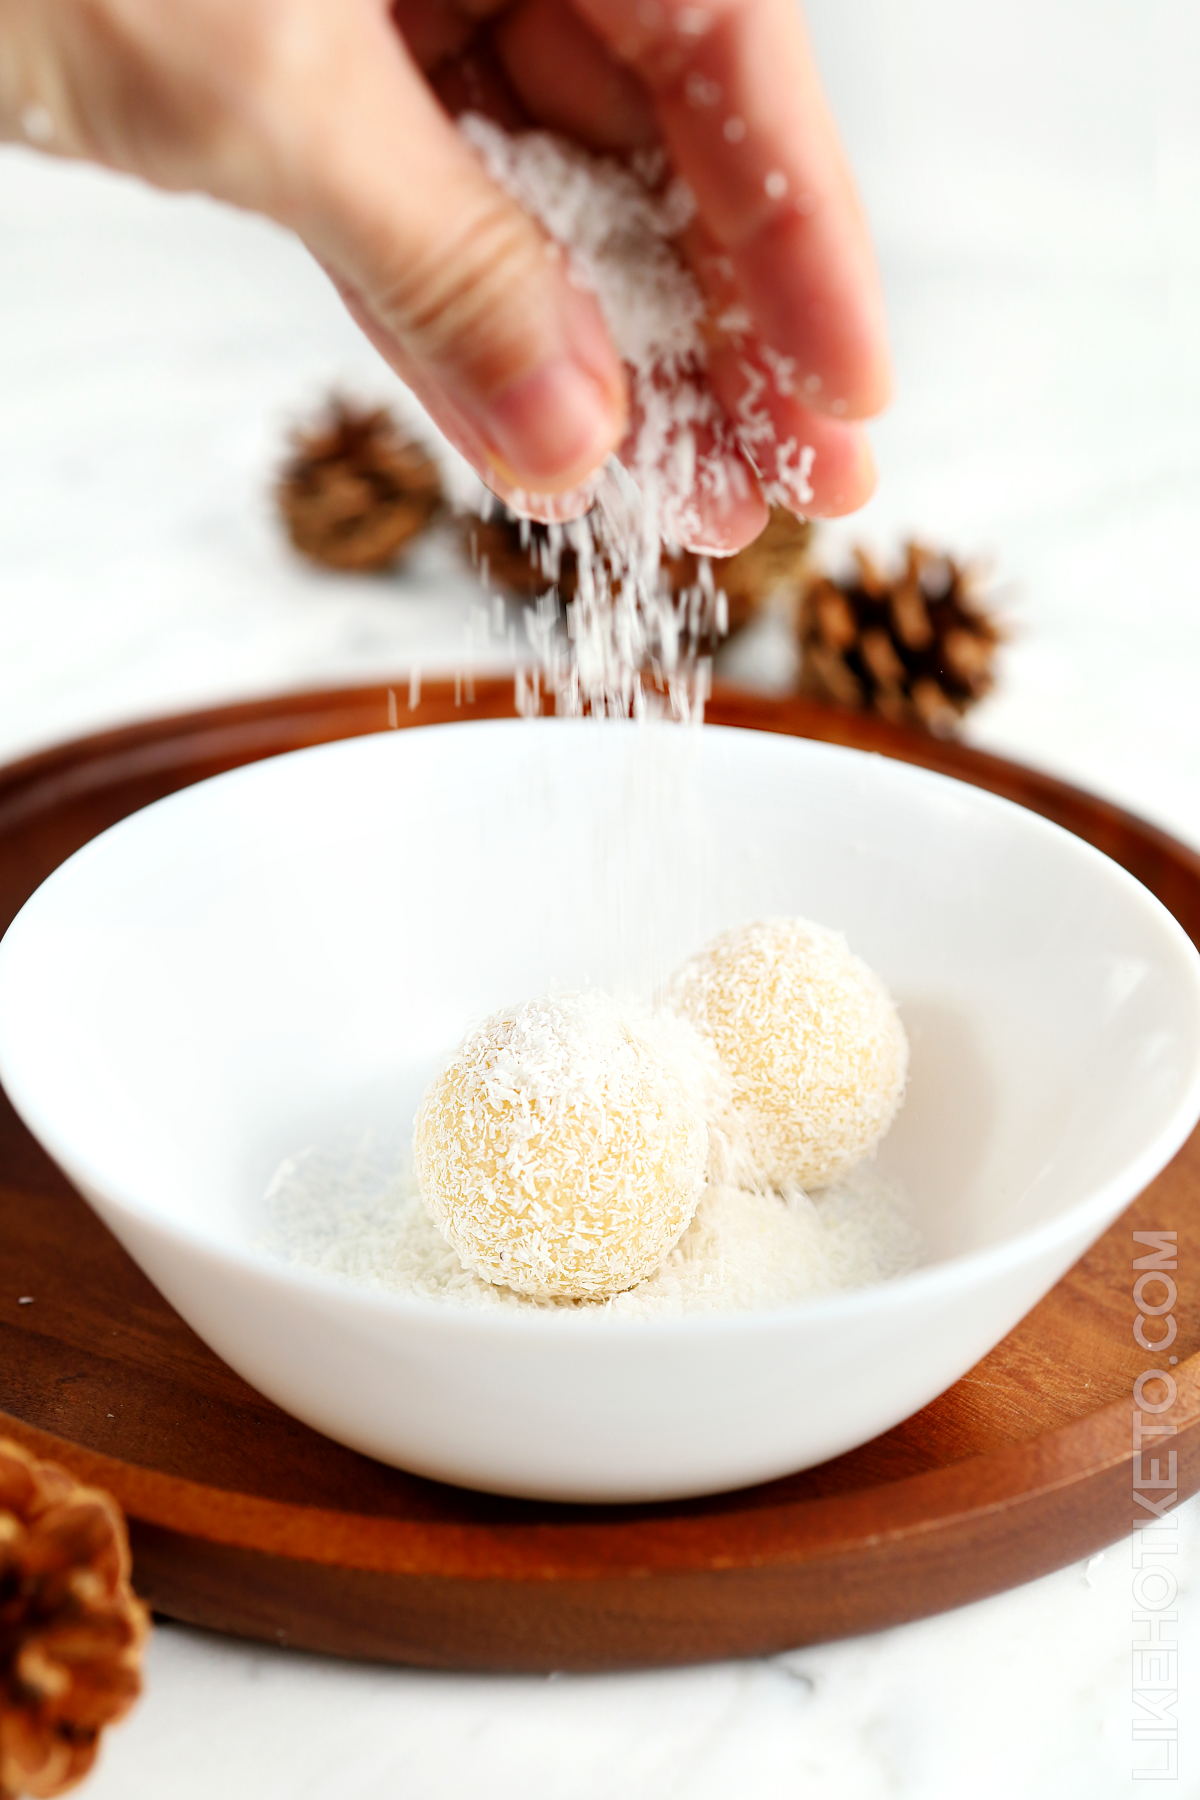 Dusting snowball truffles with shredded coconut.